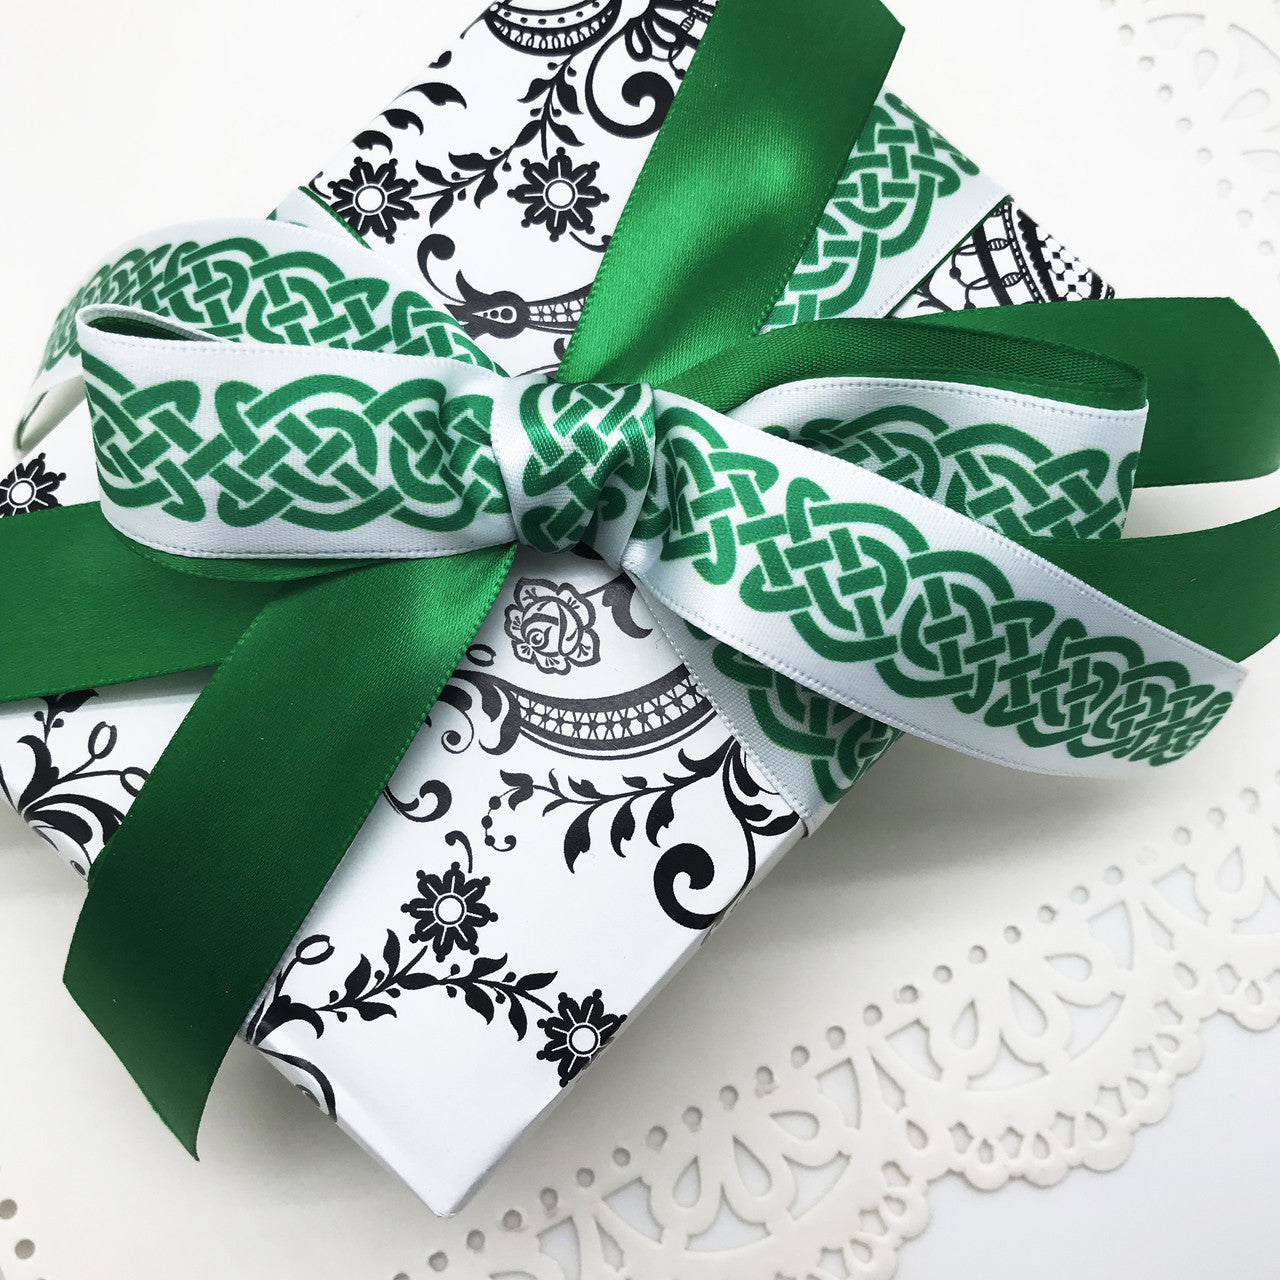 We always love mixing patterns! Our Celtic knot mixed with a solid green on a black and white damask paper is oh so pretty!